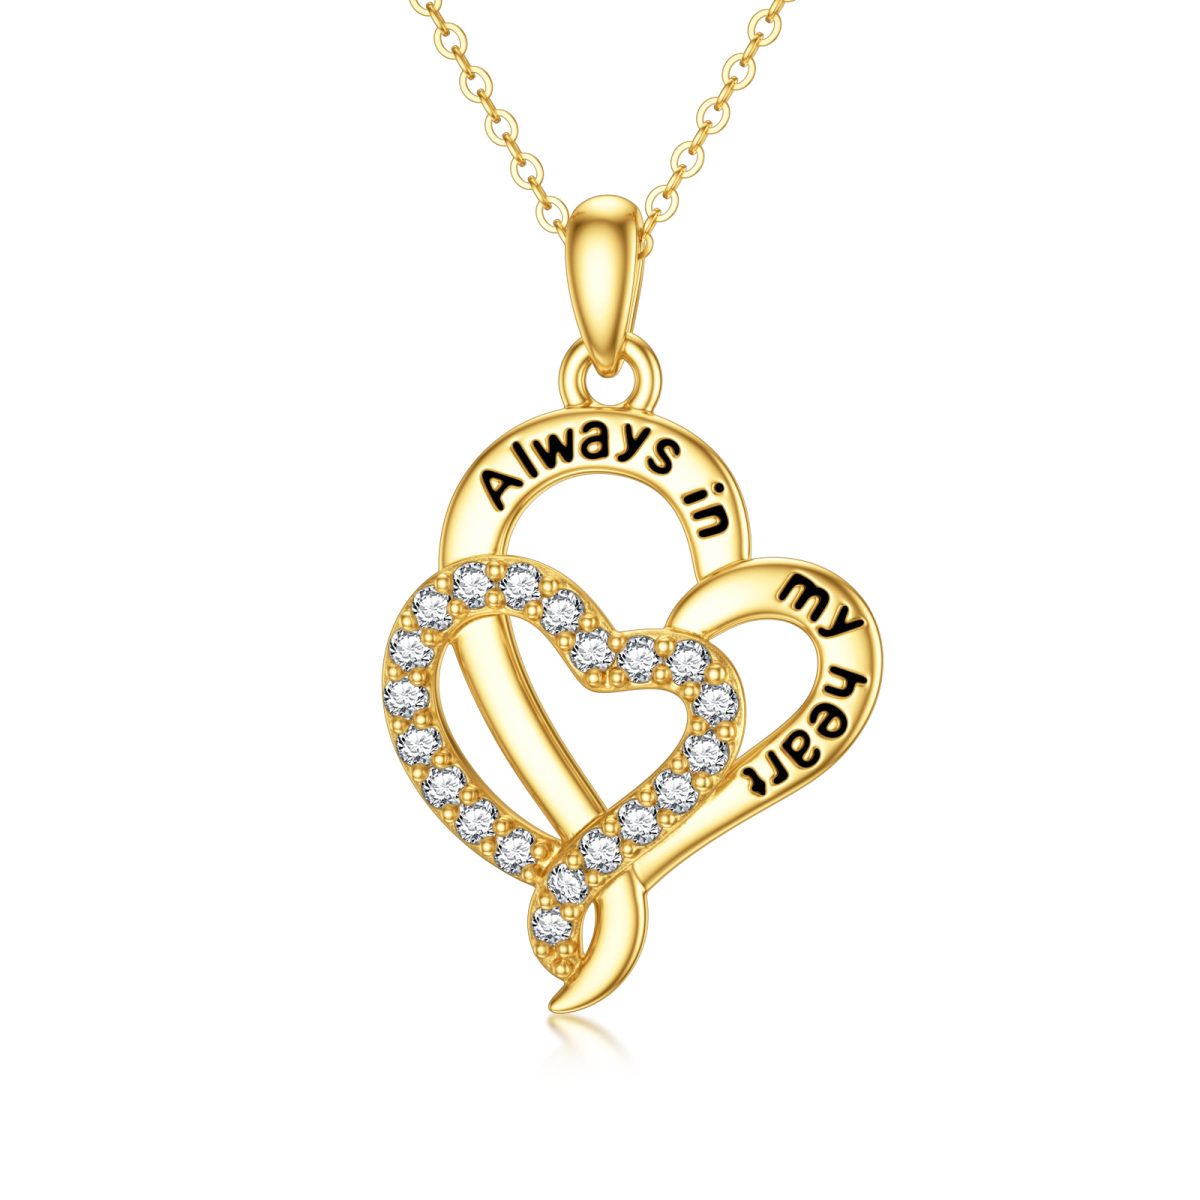 14K Gold Circular Shaped Cubic Zirconia Pendant Necklace with Engraved Word-1